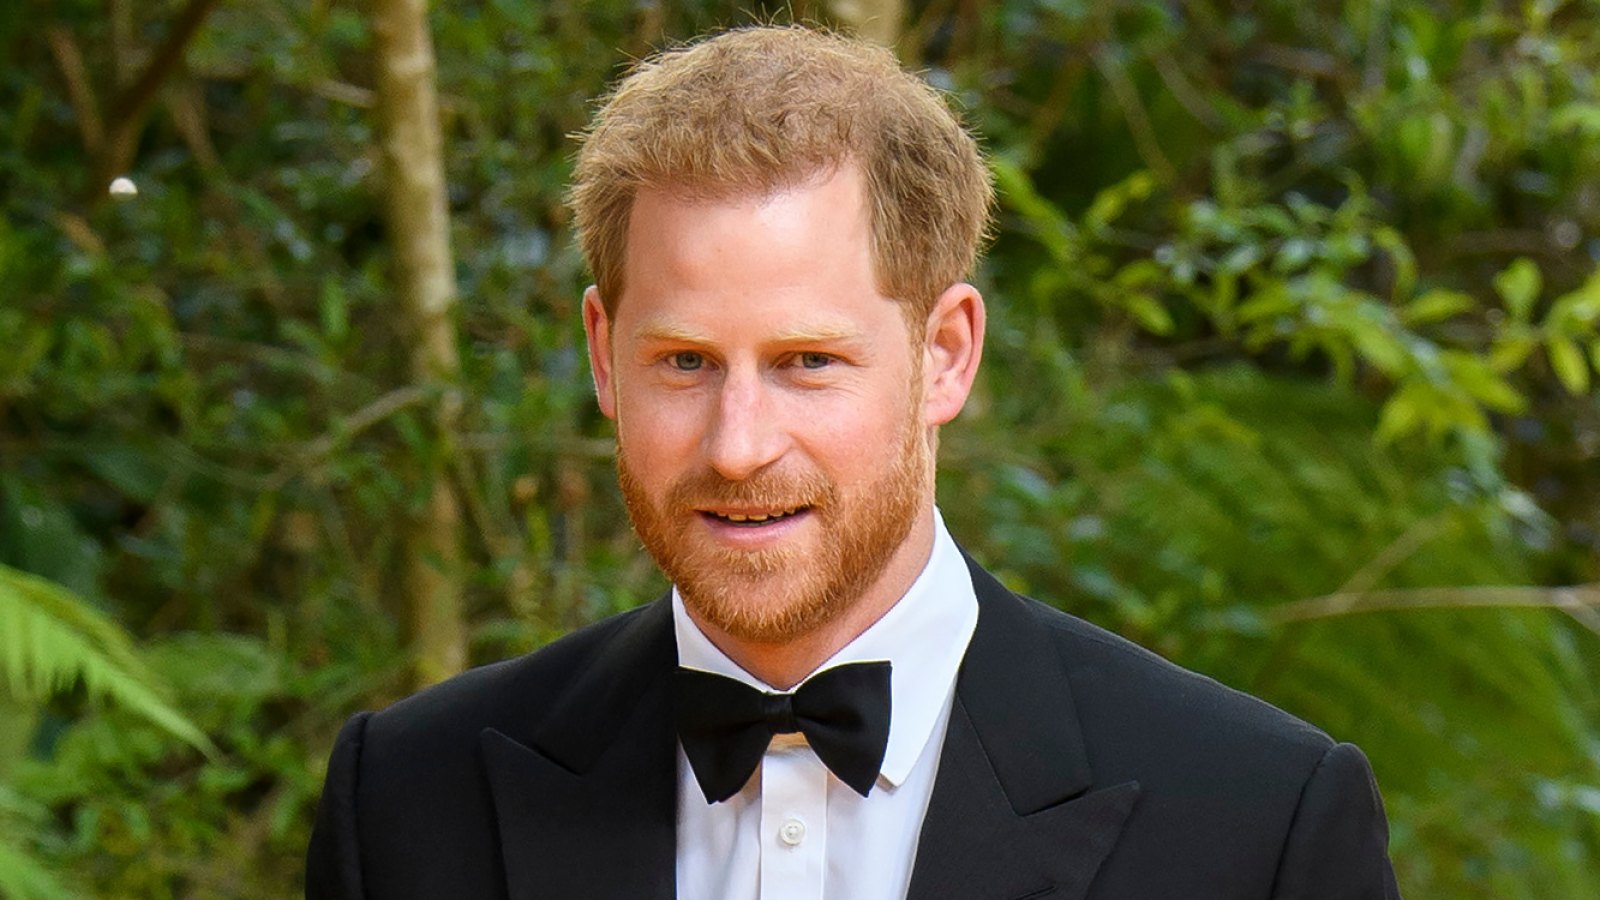 That Tux! Prince Harry Looks Dapper While Honoring Oxford Scientists at 'GQ' Event